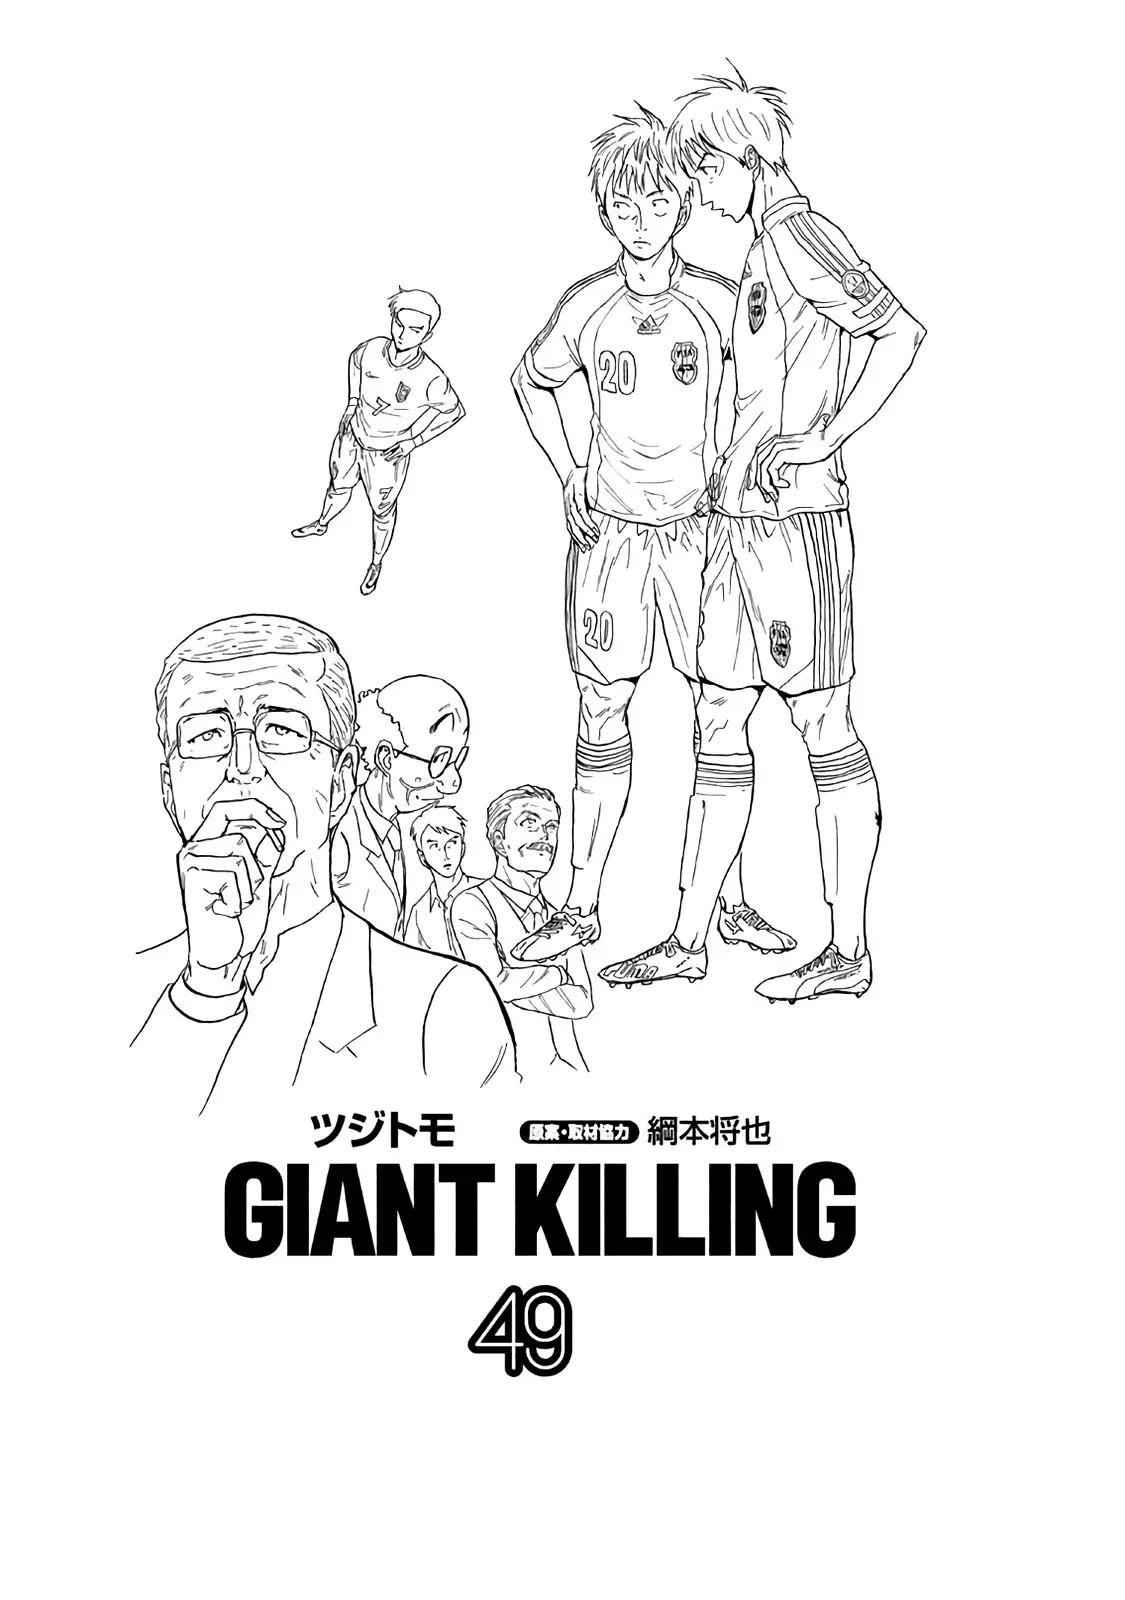 Giant Killing - 478 page 2-9585d9f6